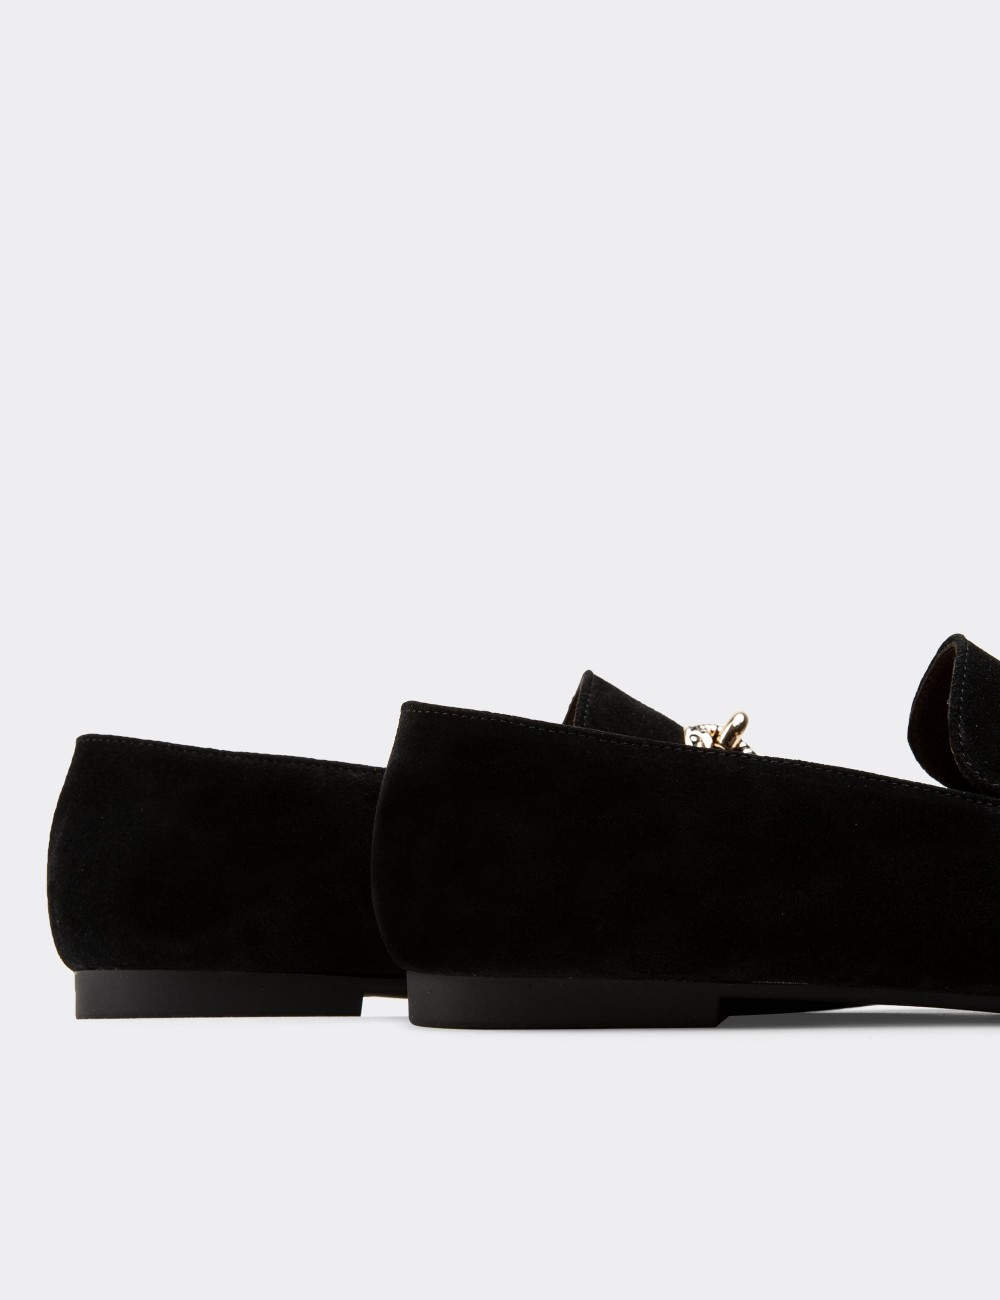 Black Suede Leather Loafers - 01912ZSYHC01